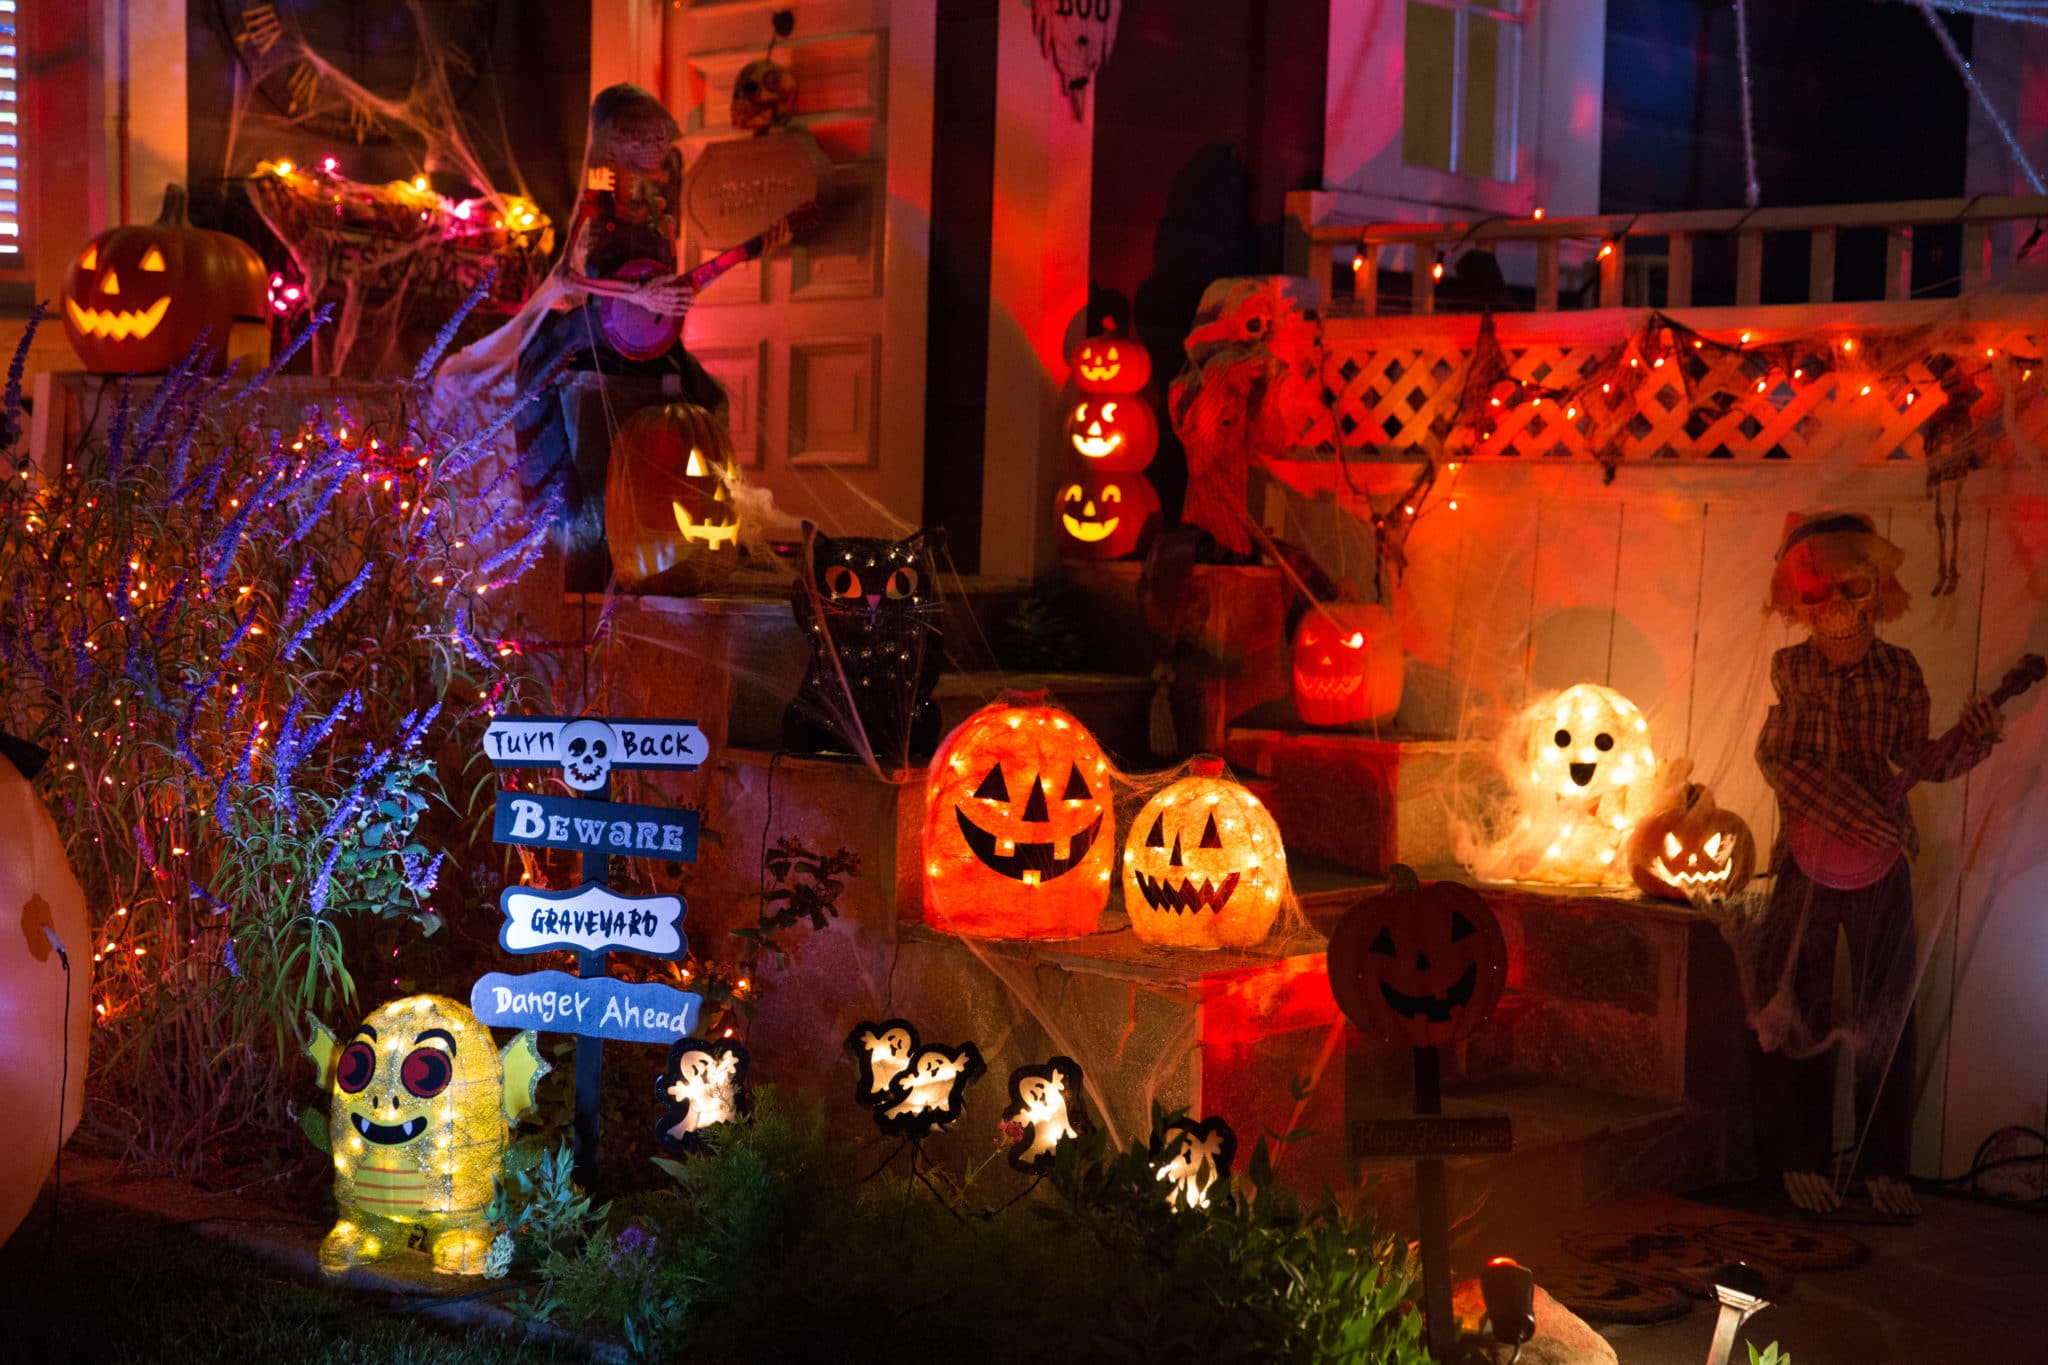 8 Smart Halloween Decorations to Spooky up Your Home